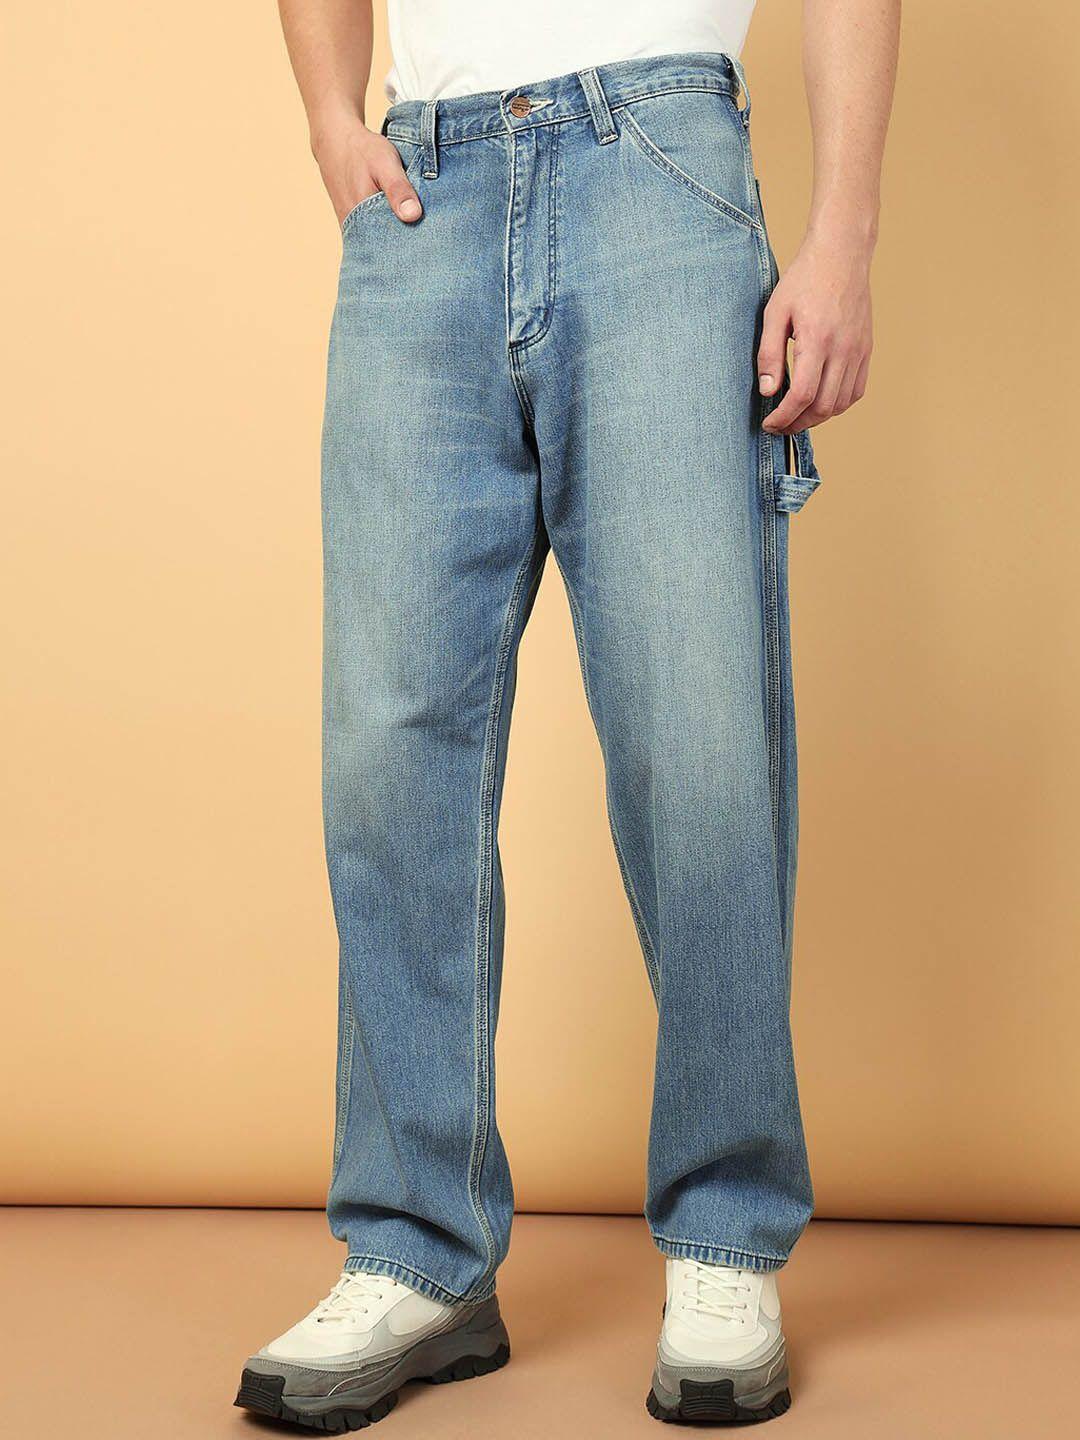 wrangler-men-relaxed-fit-high-rise-clean-look-heavy-fade-jeans